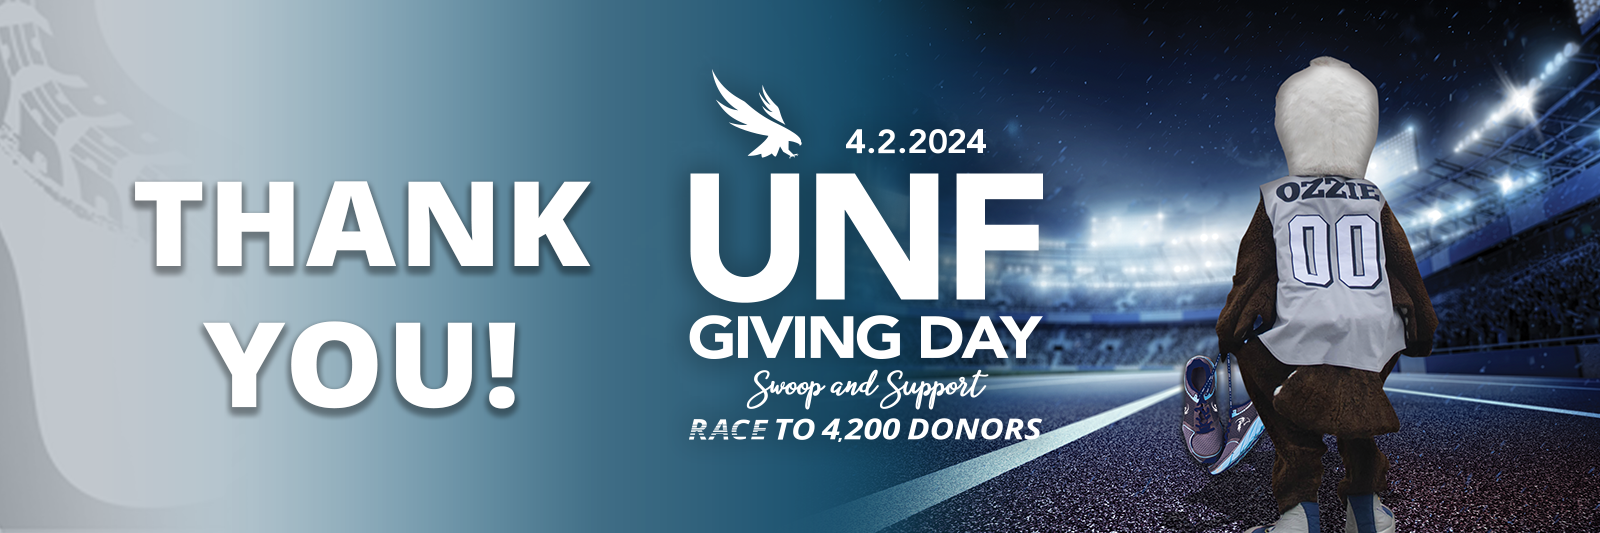 thank you with giving day logo and ozzie holding shoes on a track